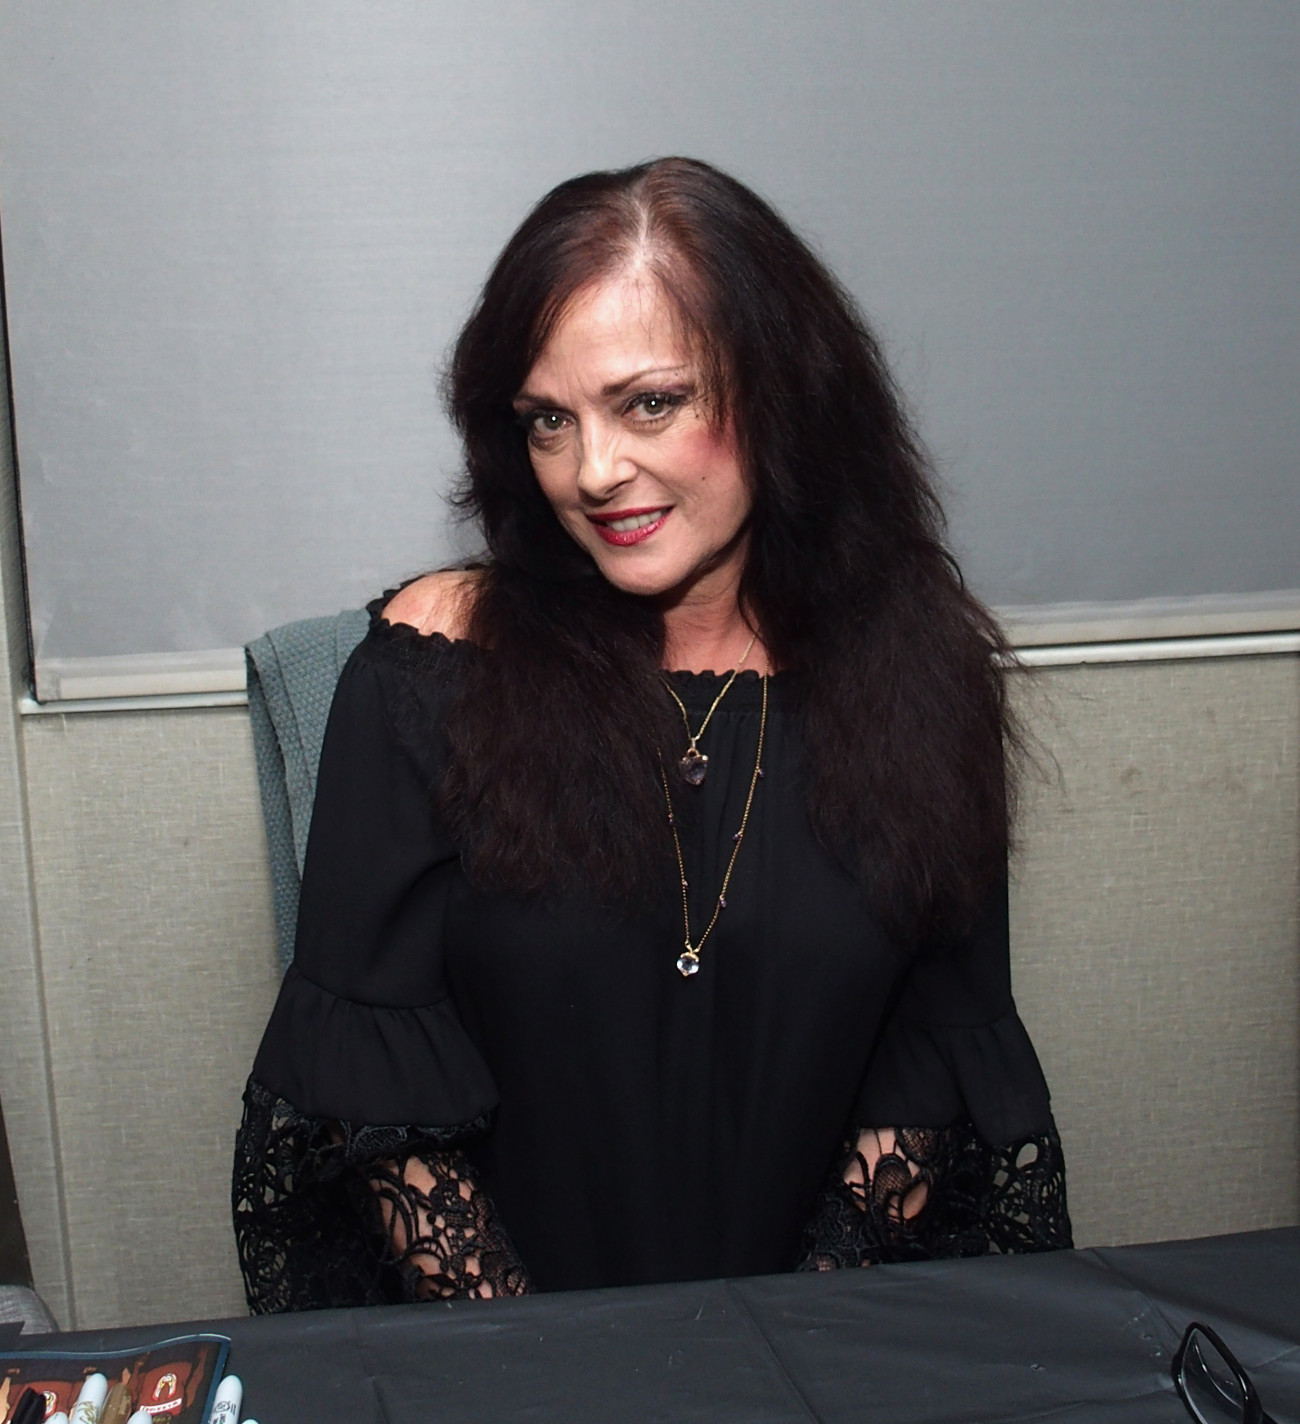 PARSIPPANY, NJ - OCTOBER 25: Lisa Loring attends the Chiller Theatre Expo Fall 2019  at Parsippany Hilton on October 25, 2019 in Parsippany, New Jersey.  (Photo by Bobby Bank/Getty Images)